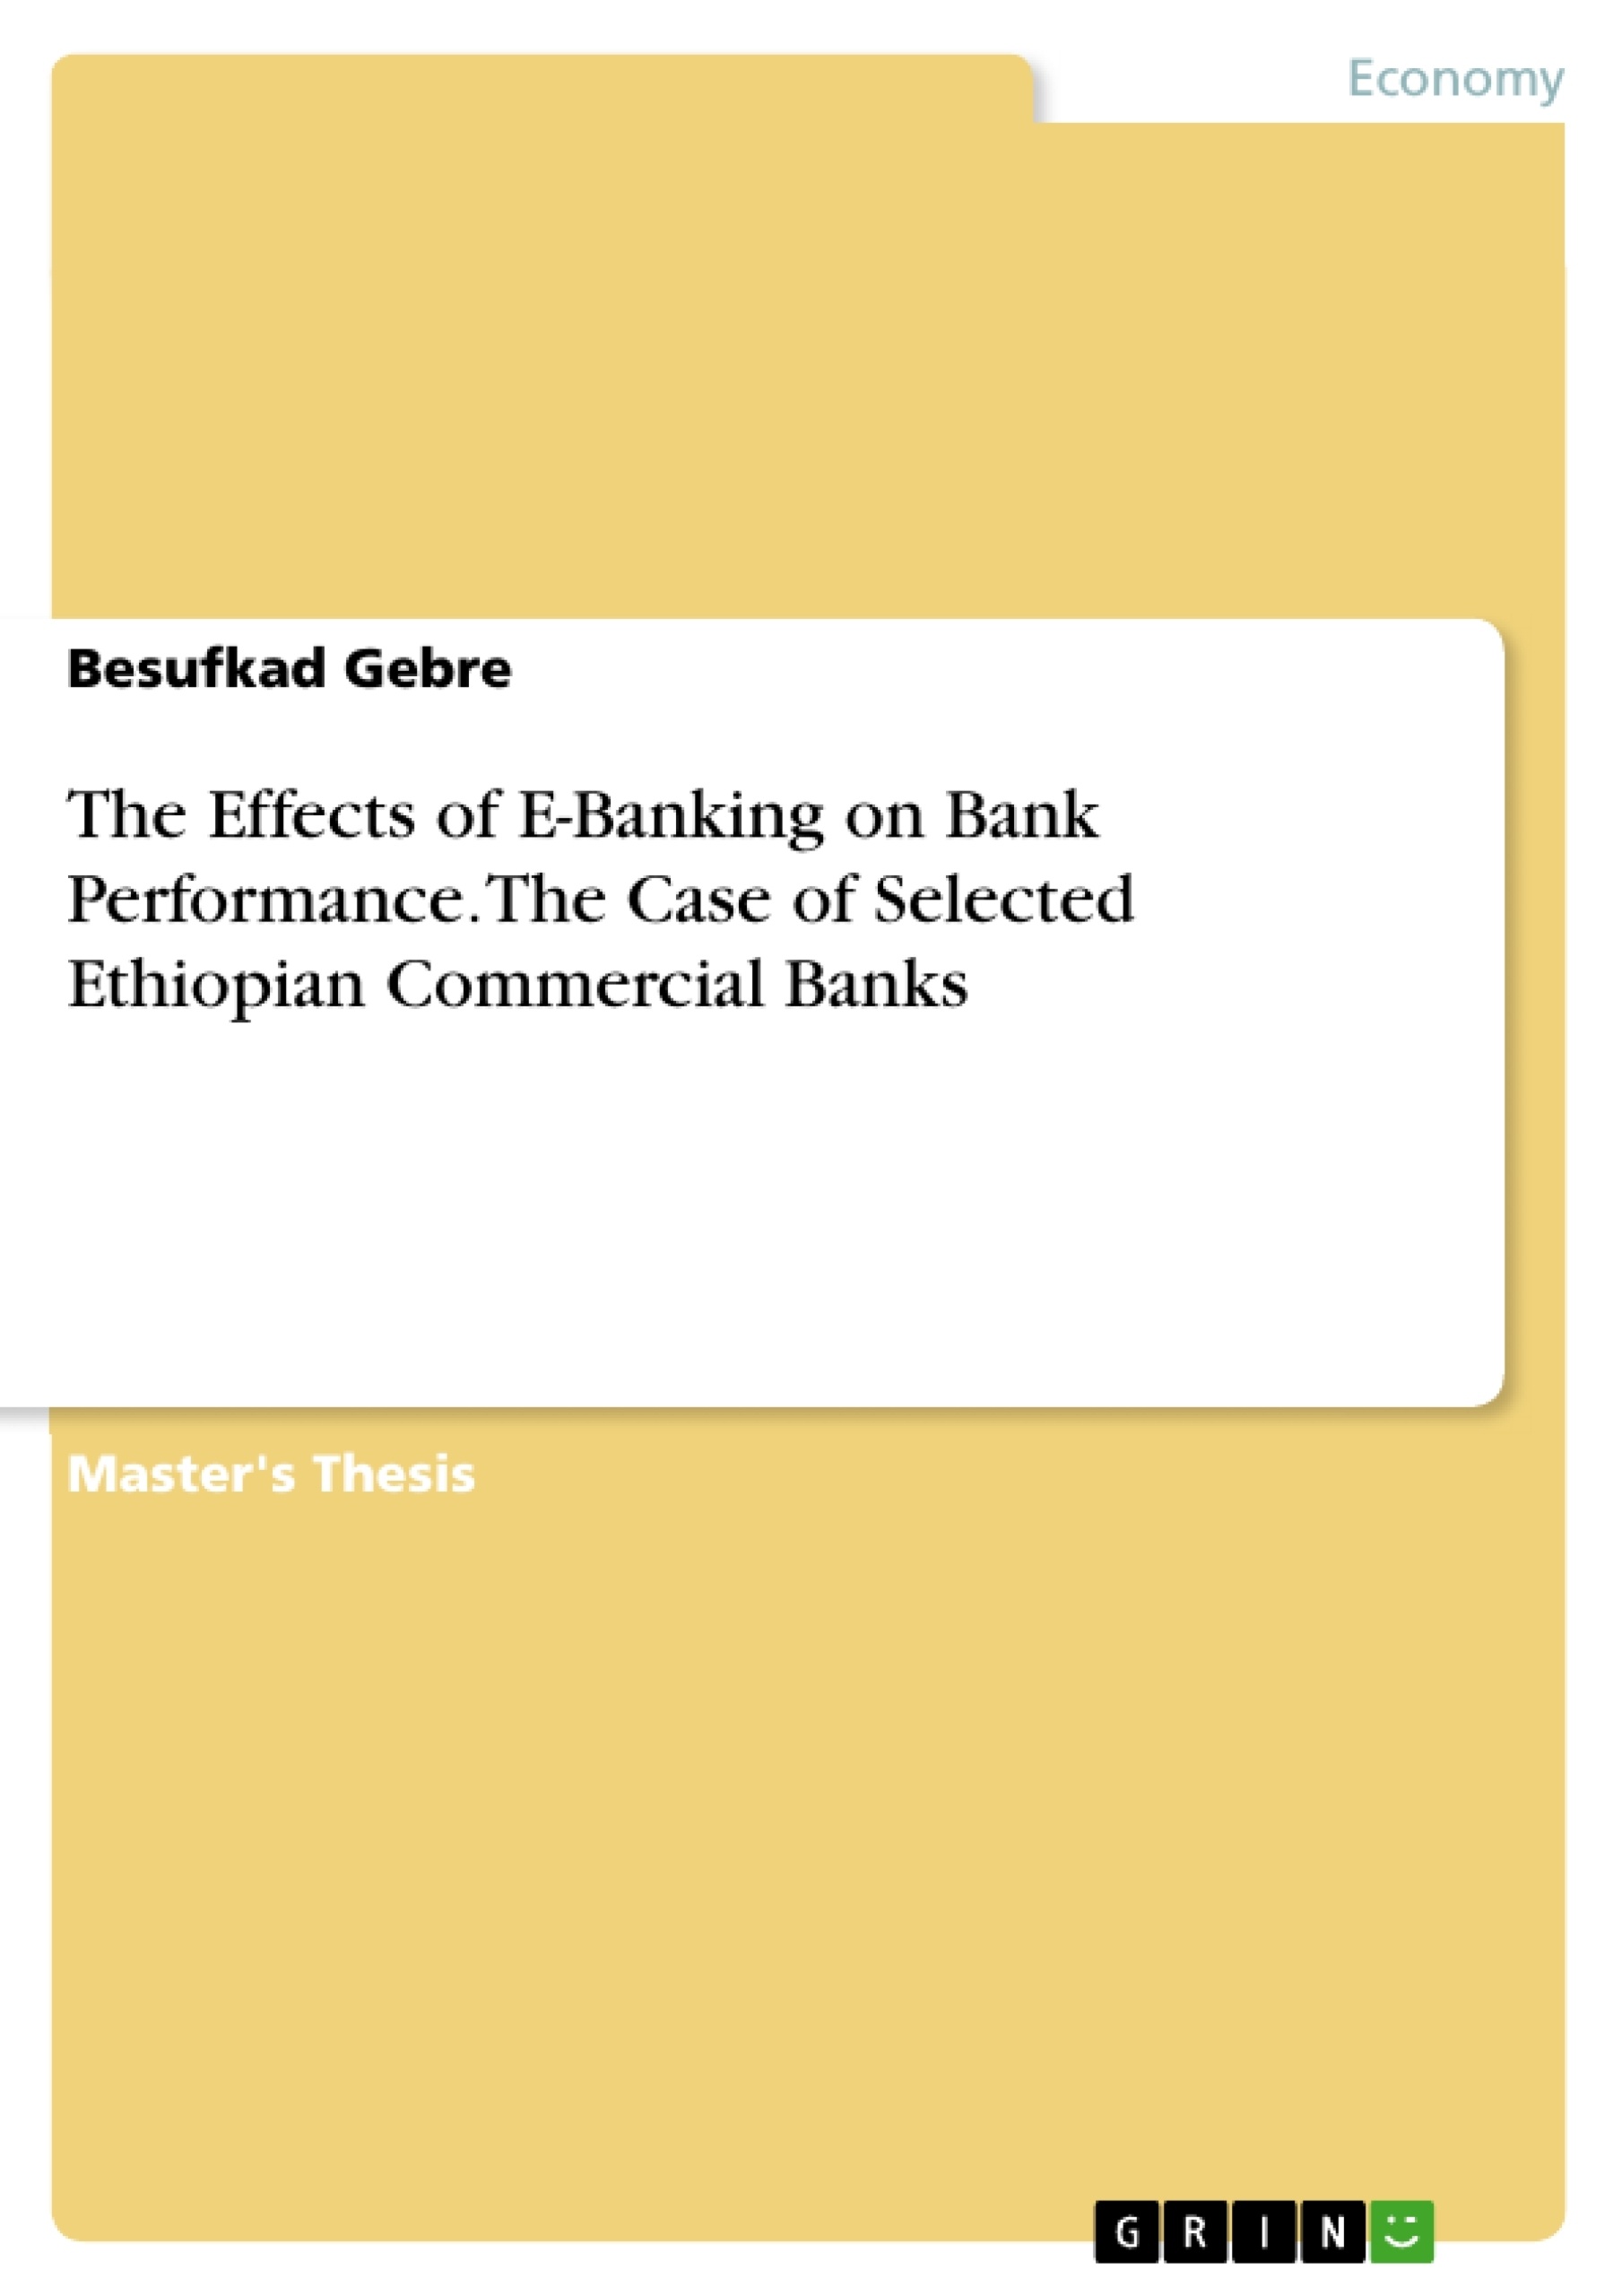 Title: The Effects of E-Banking on Bank Performance. The Case of Selected Ethiopian Commercial Banks